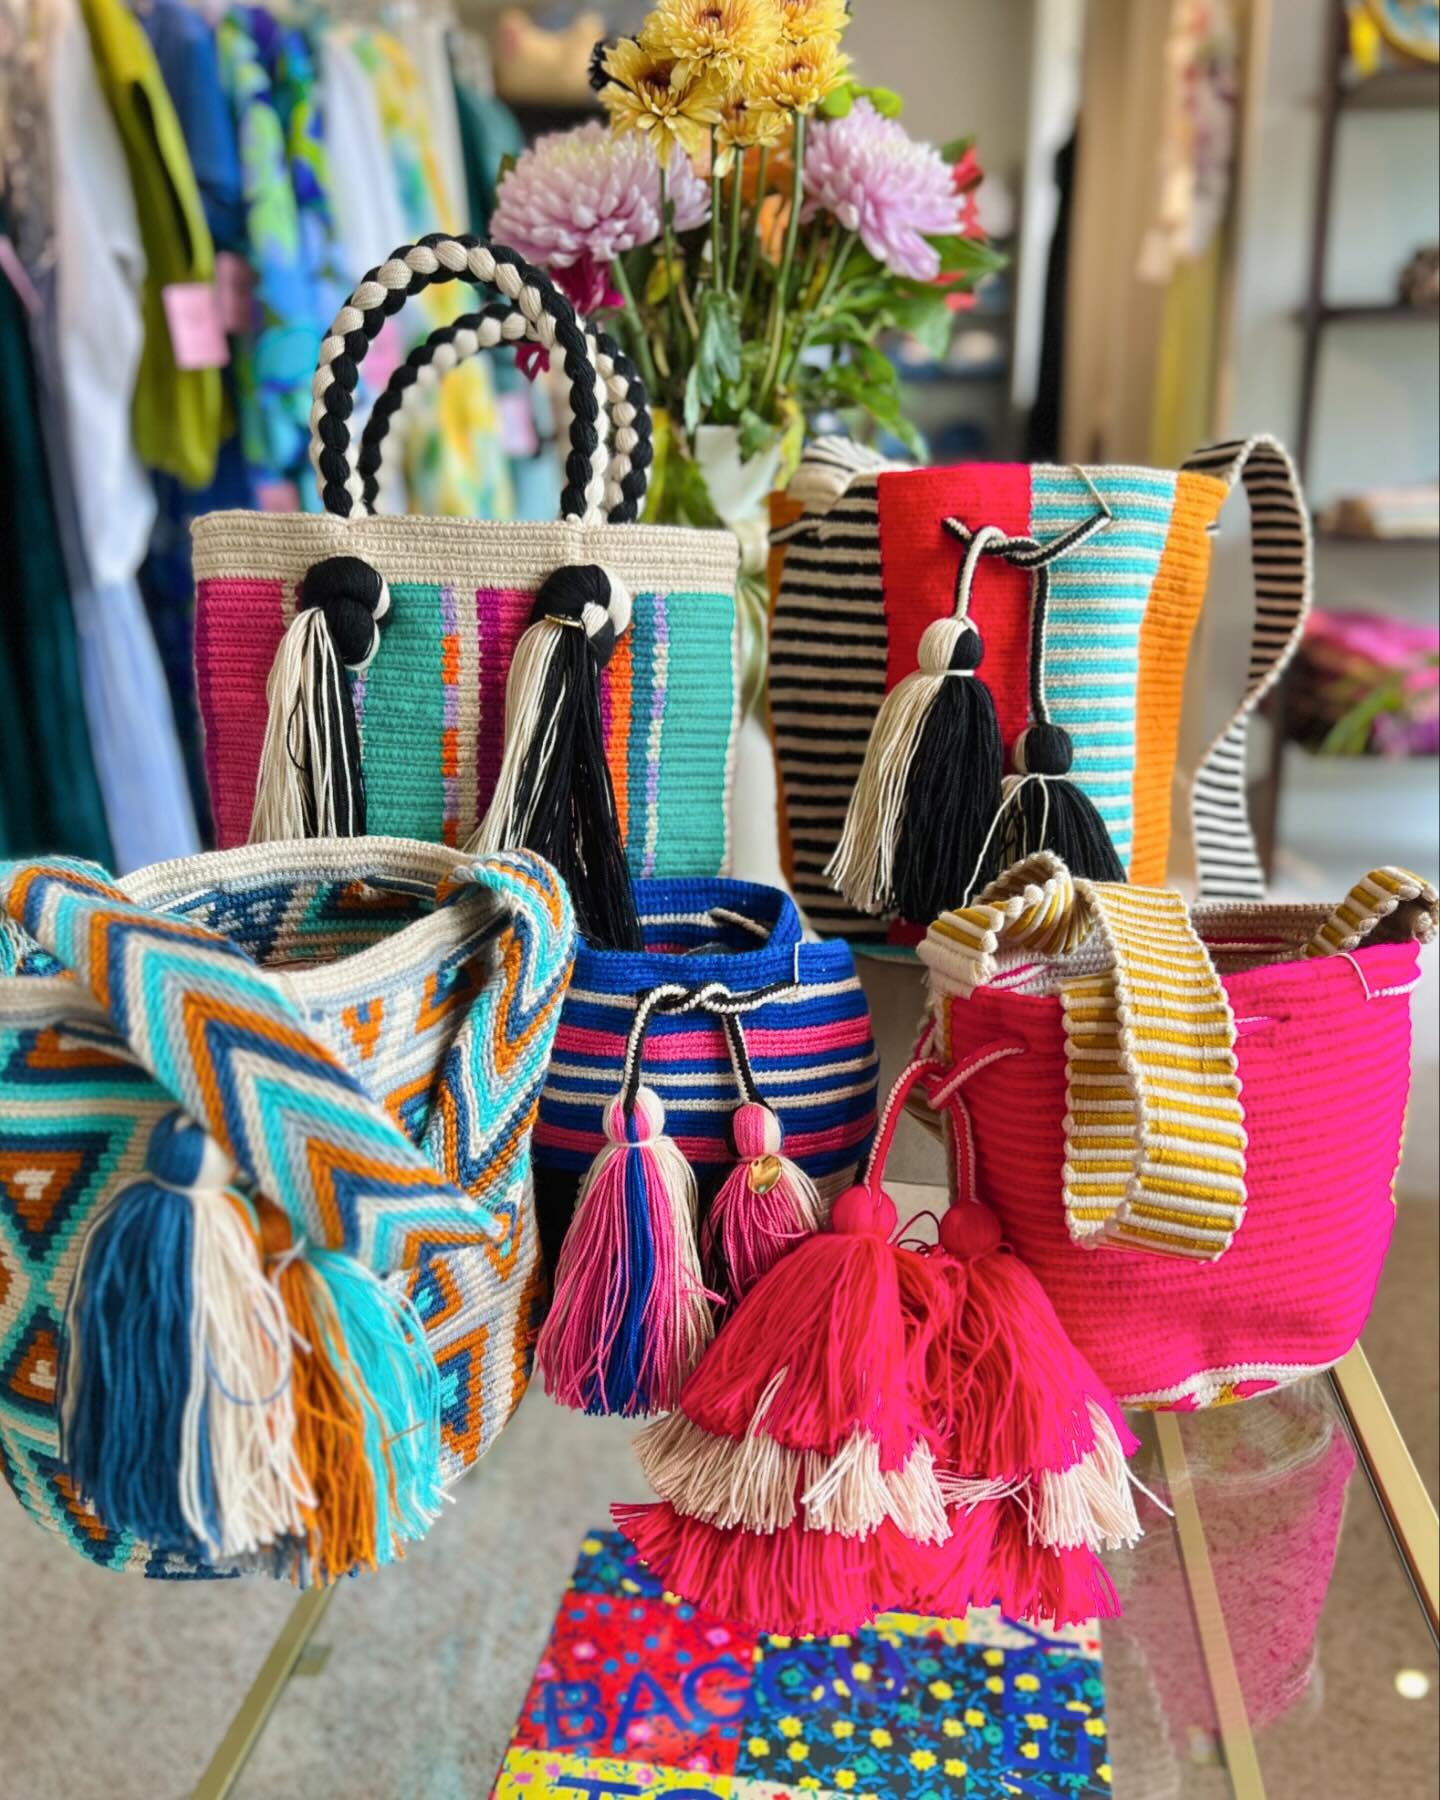 New summer handbags just hit the floor! These beauties are all one-of-a-kind and handmade by artisans in Columbia. It will be the perfect accessory to make you smile. 😊